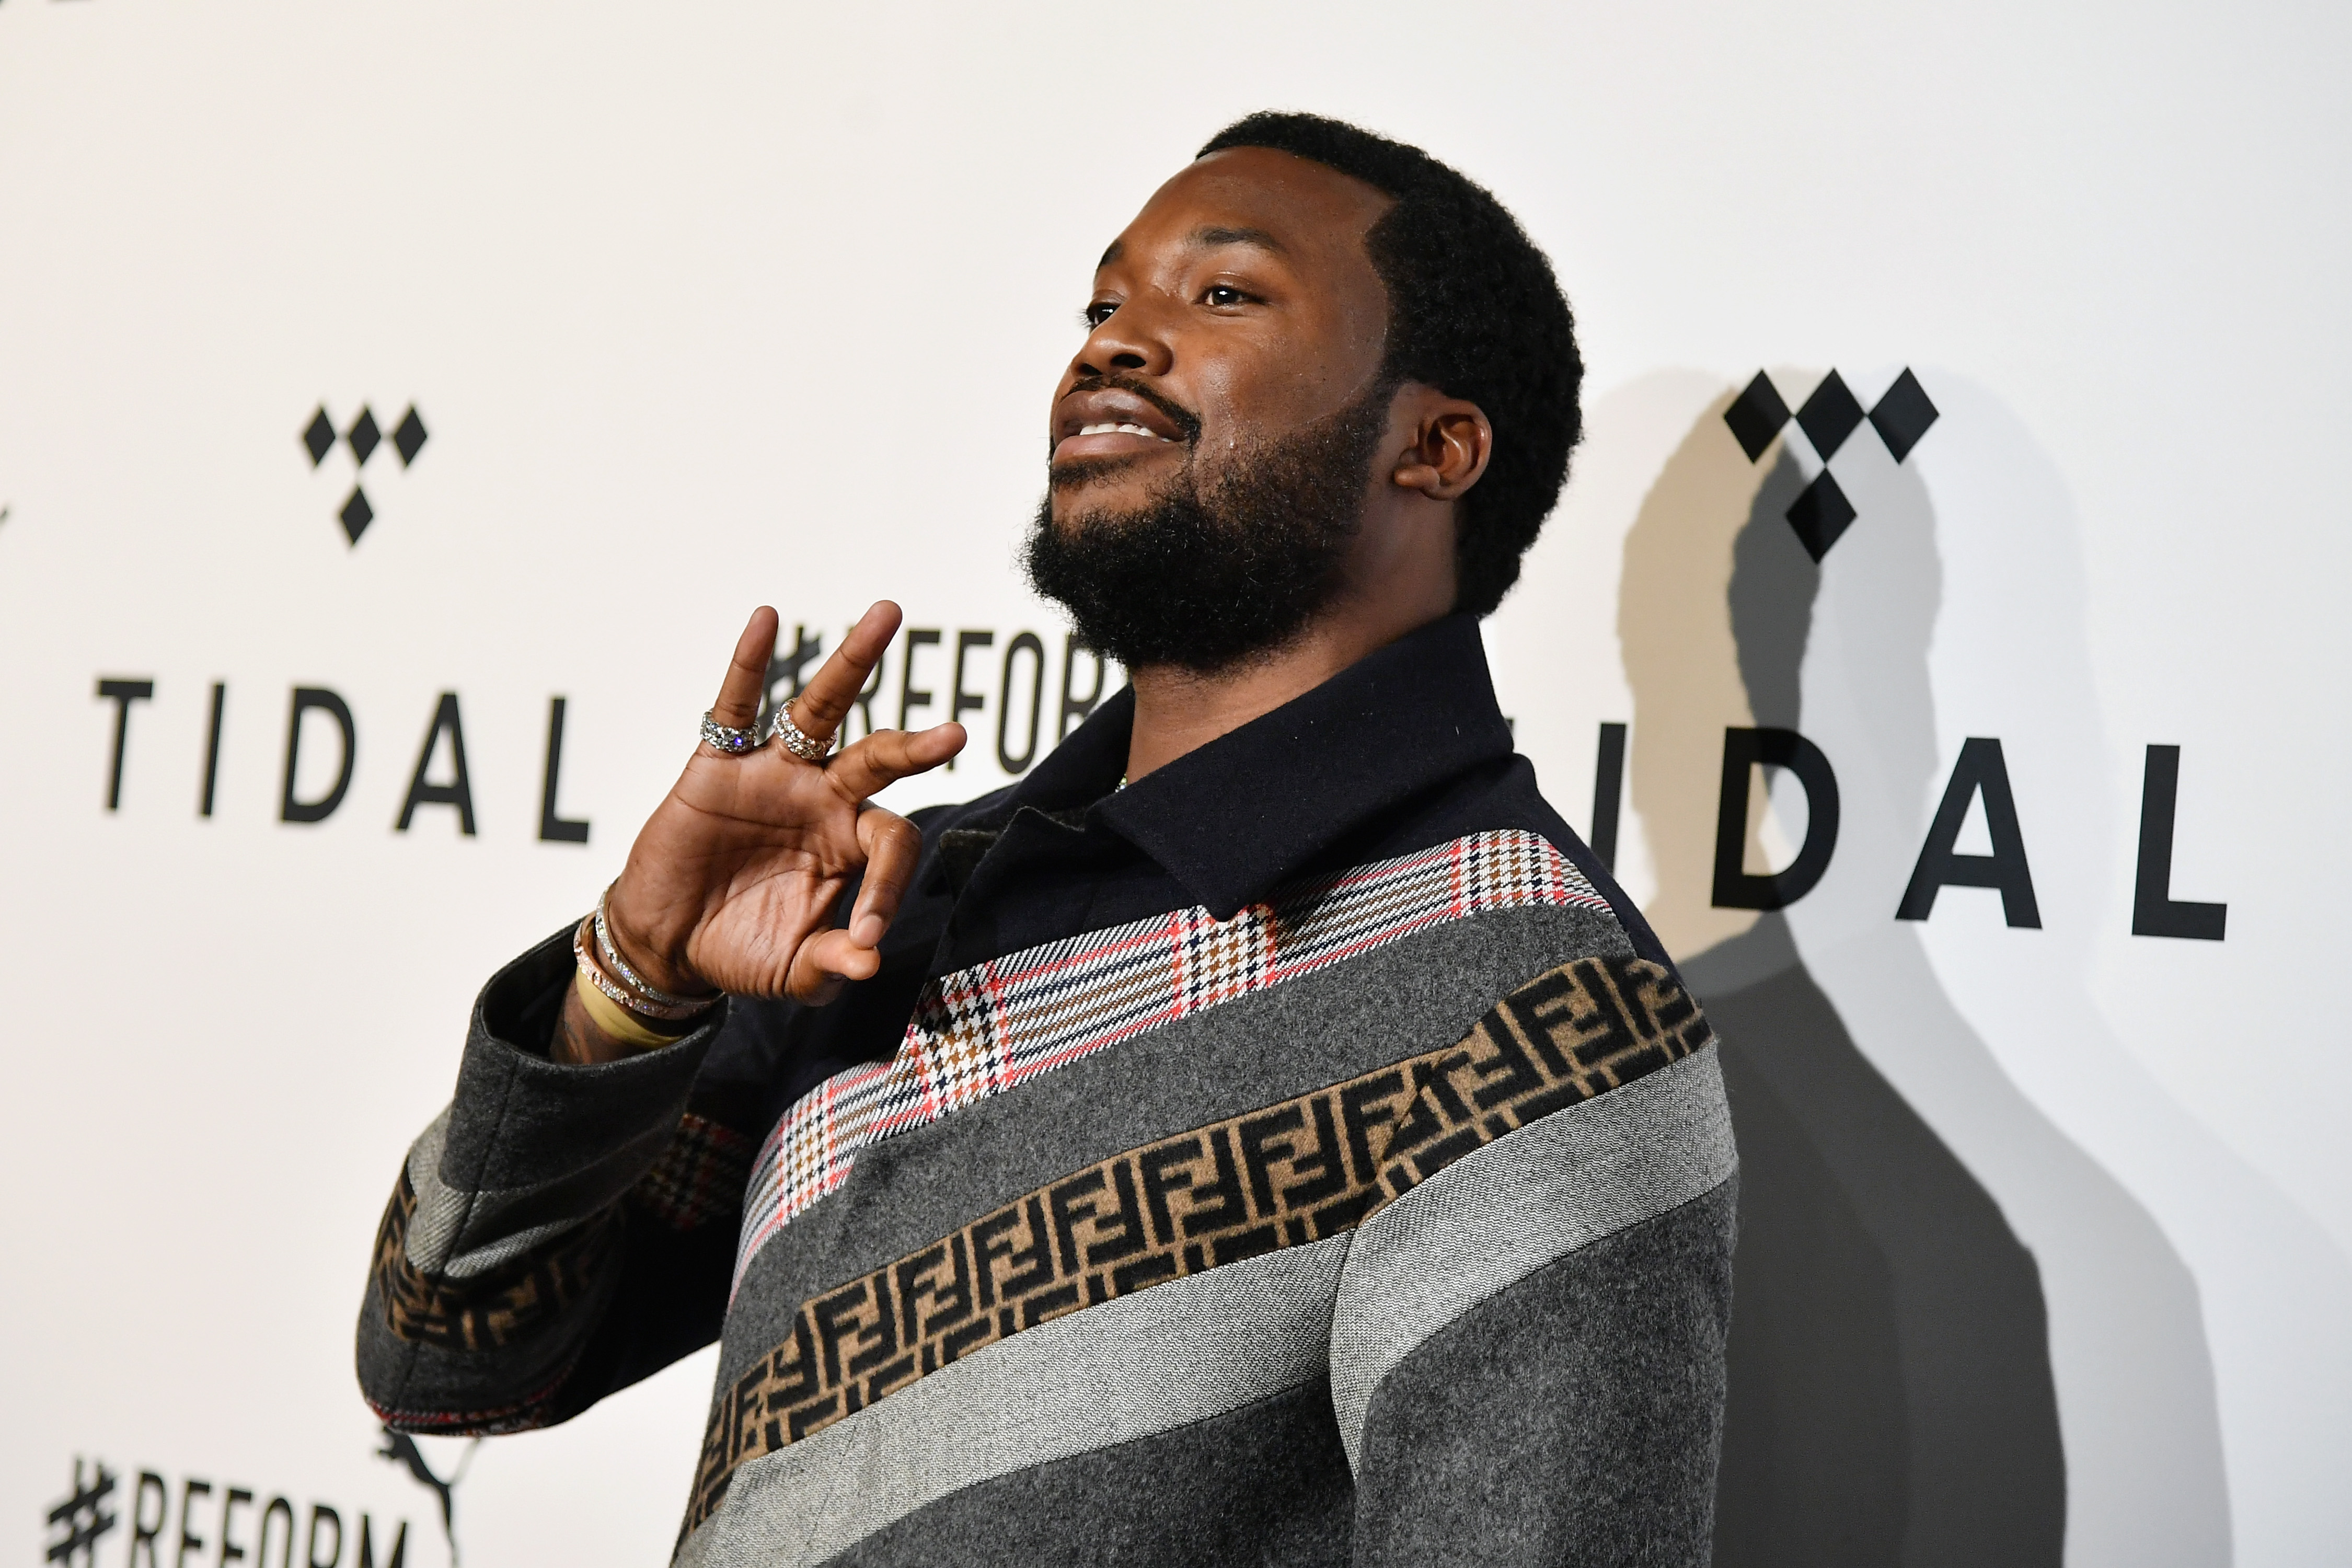 Meek Mill Reassures “The Feens” That His Album Is Still On Track